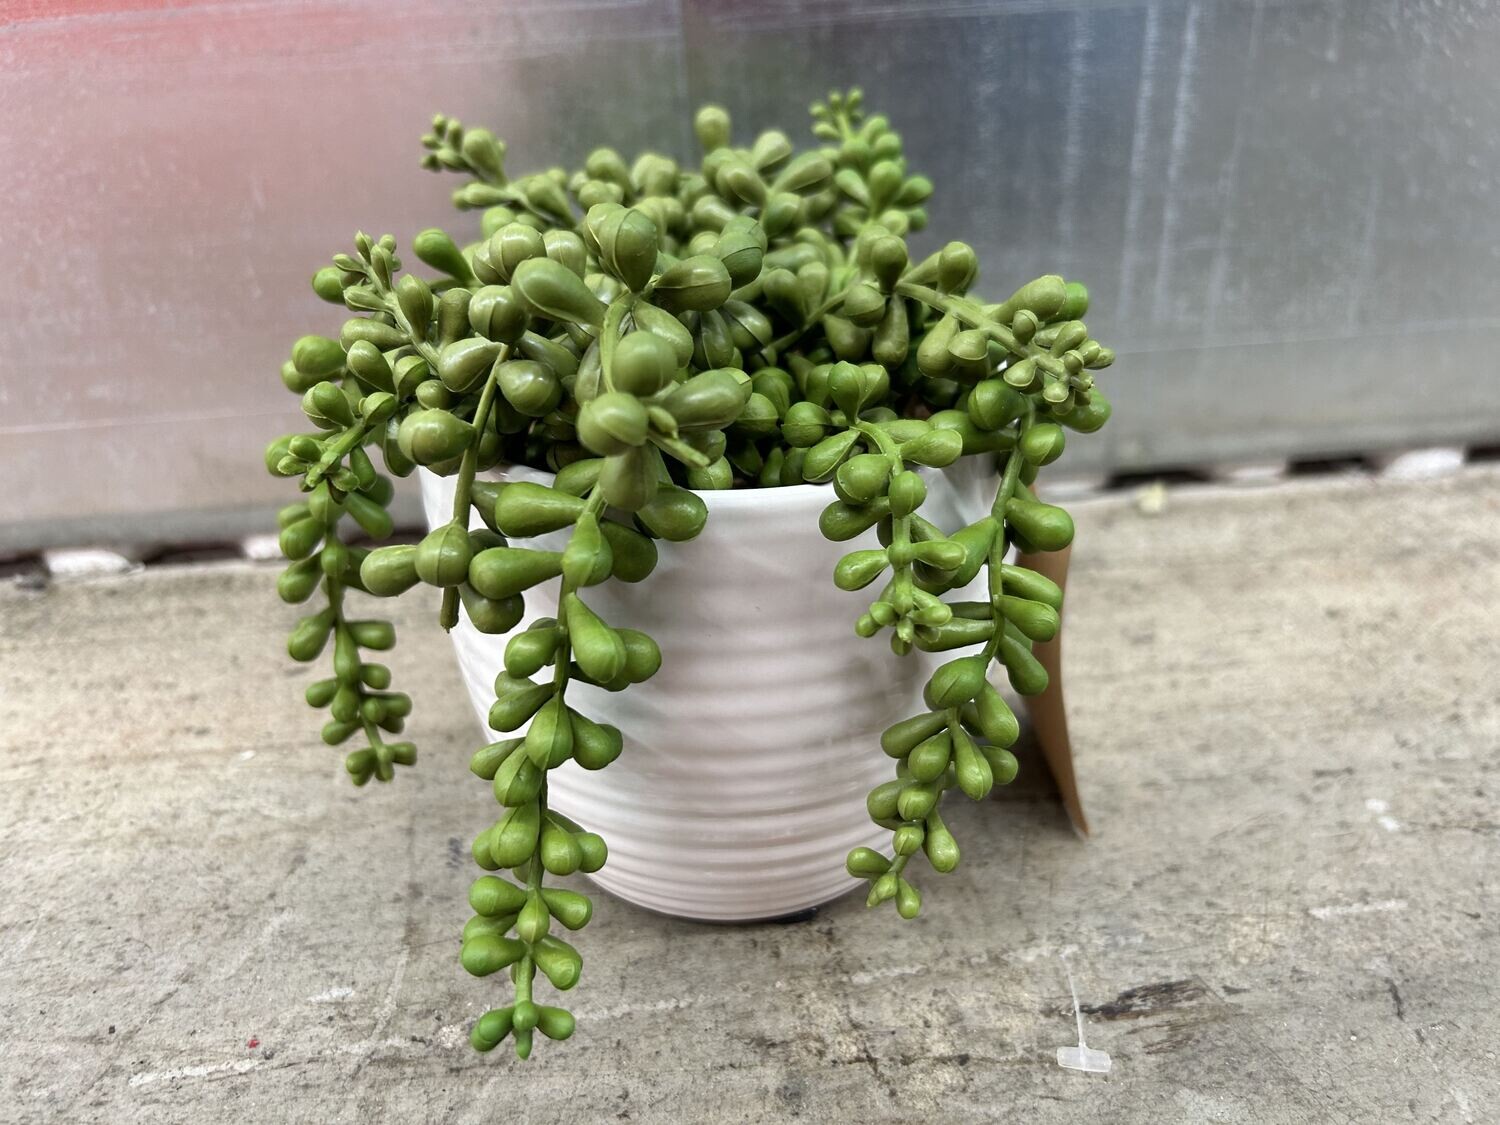 Like New! Planter, white ceramic w/ artificial "String of Pearls" #2314 ** 3 days to sell, full price